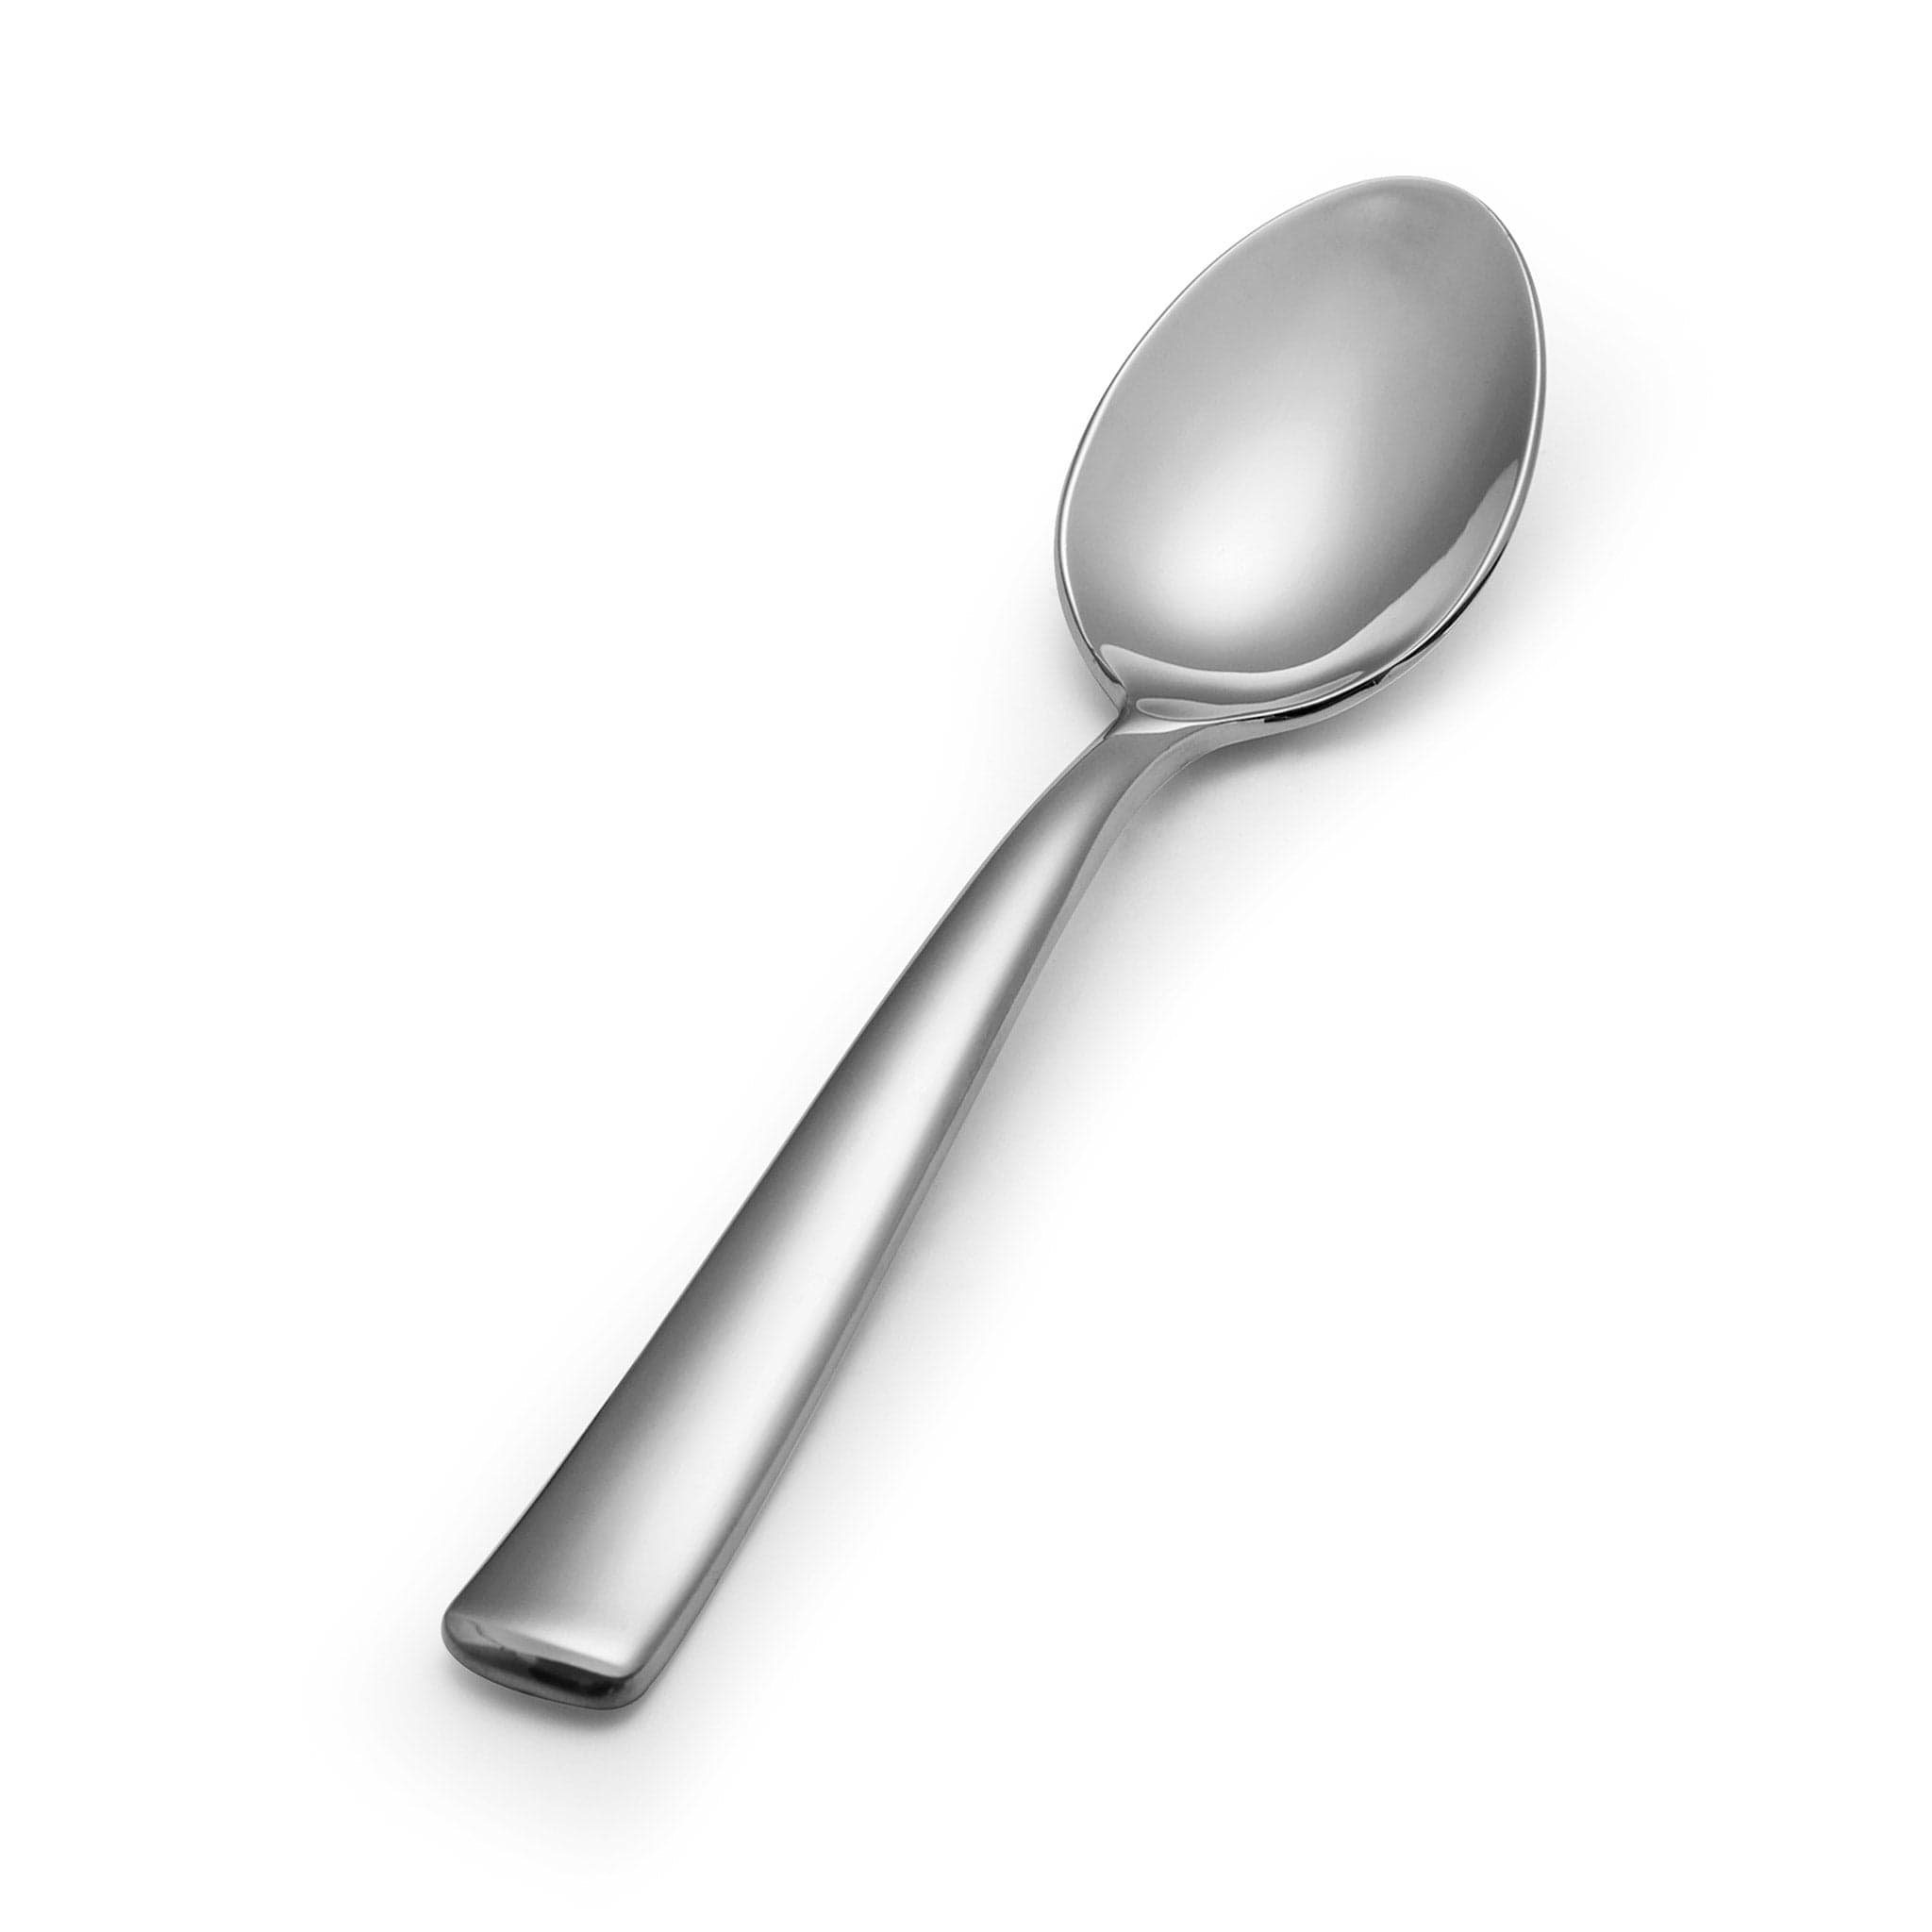 Strand 18/10 Coffee Spoon 6.3" Stainless Steel